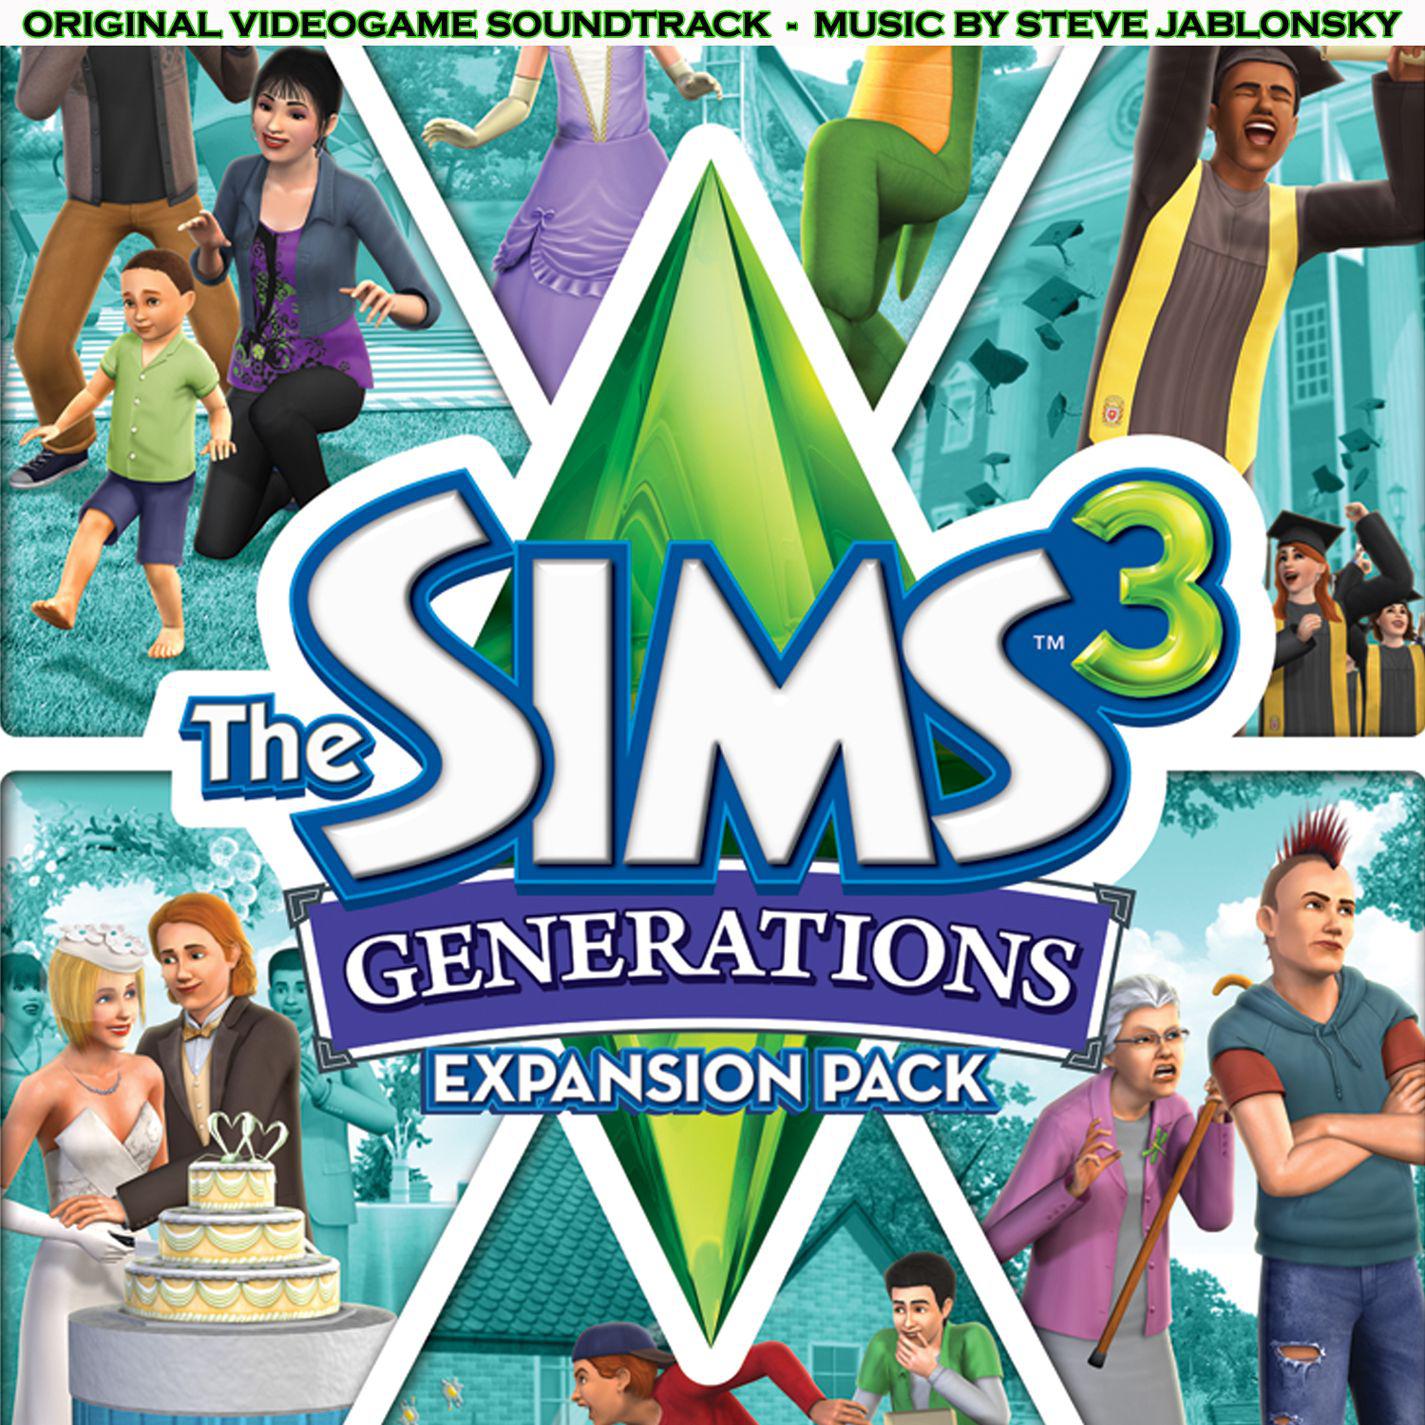 The Sims 3: Generations (Original Videogame Soundtrack)专辑